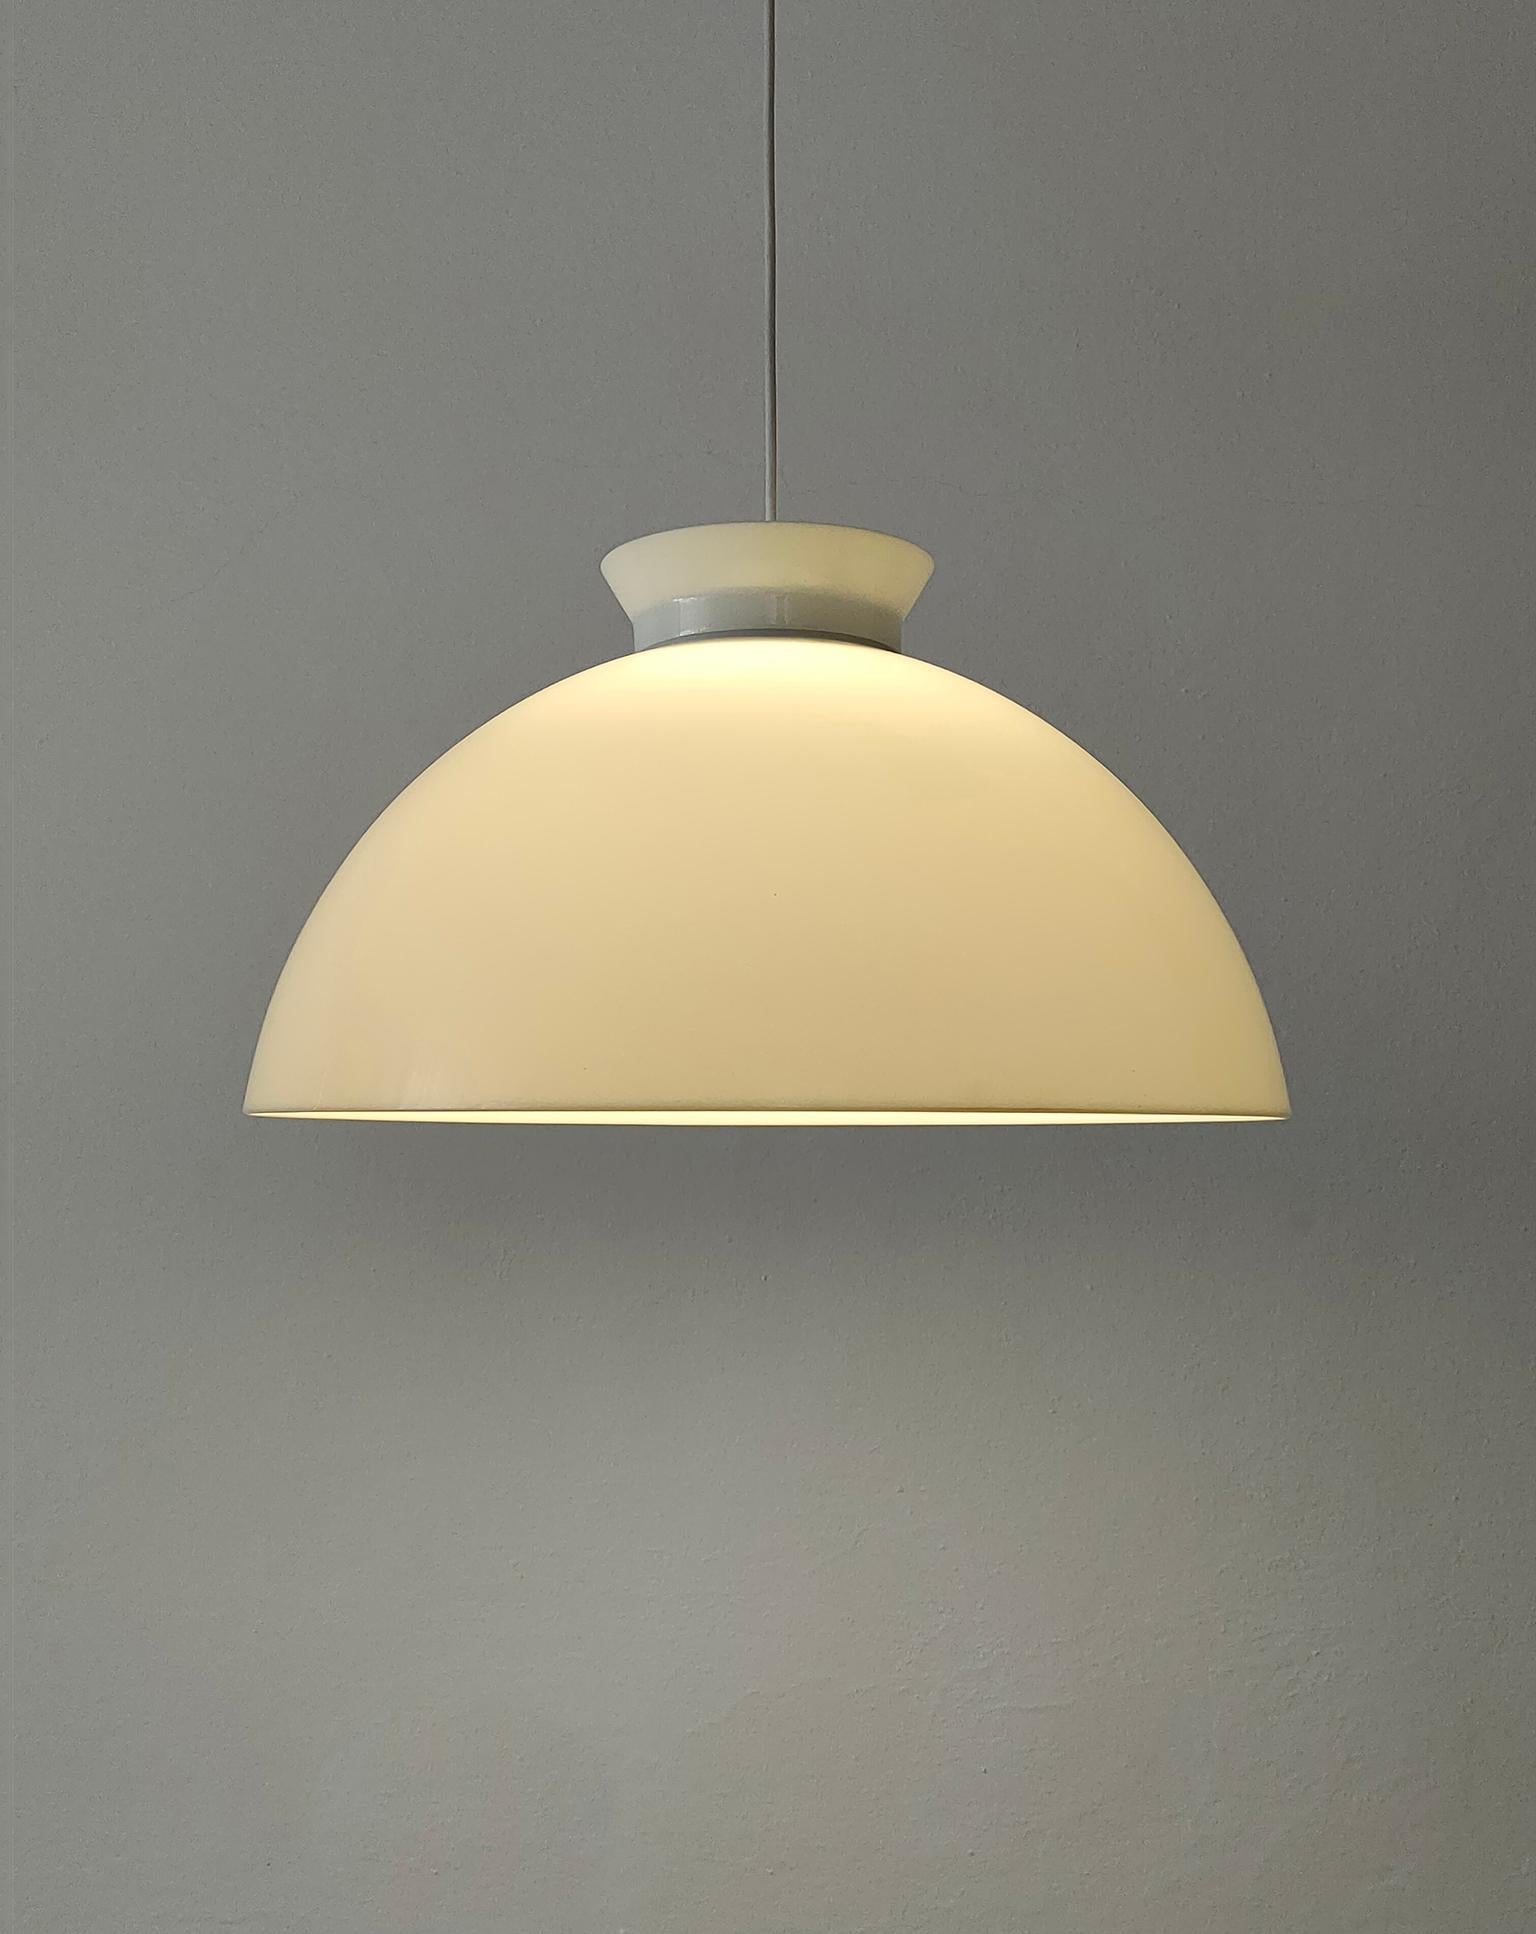 Mid-Century Modern Achille & Pier Giacomo Castglioni KD6 Hanging Lamp for Kartell 1959 Italy For Sale